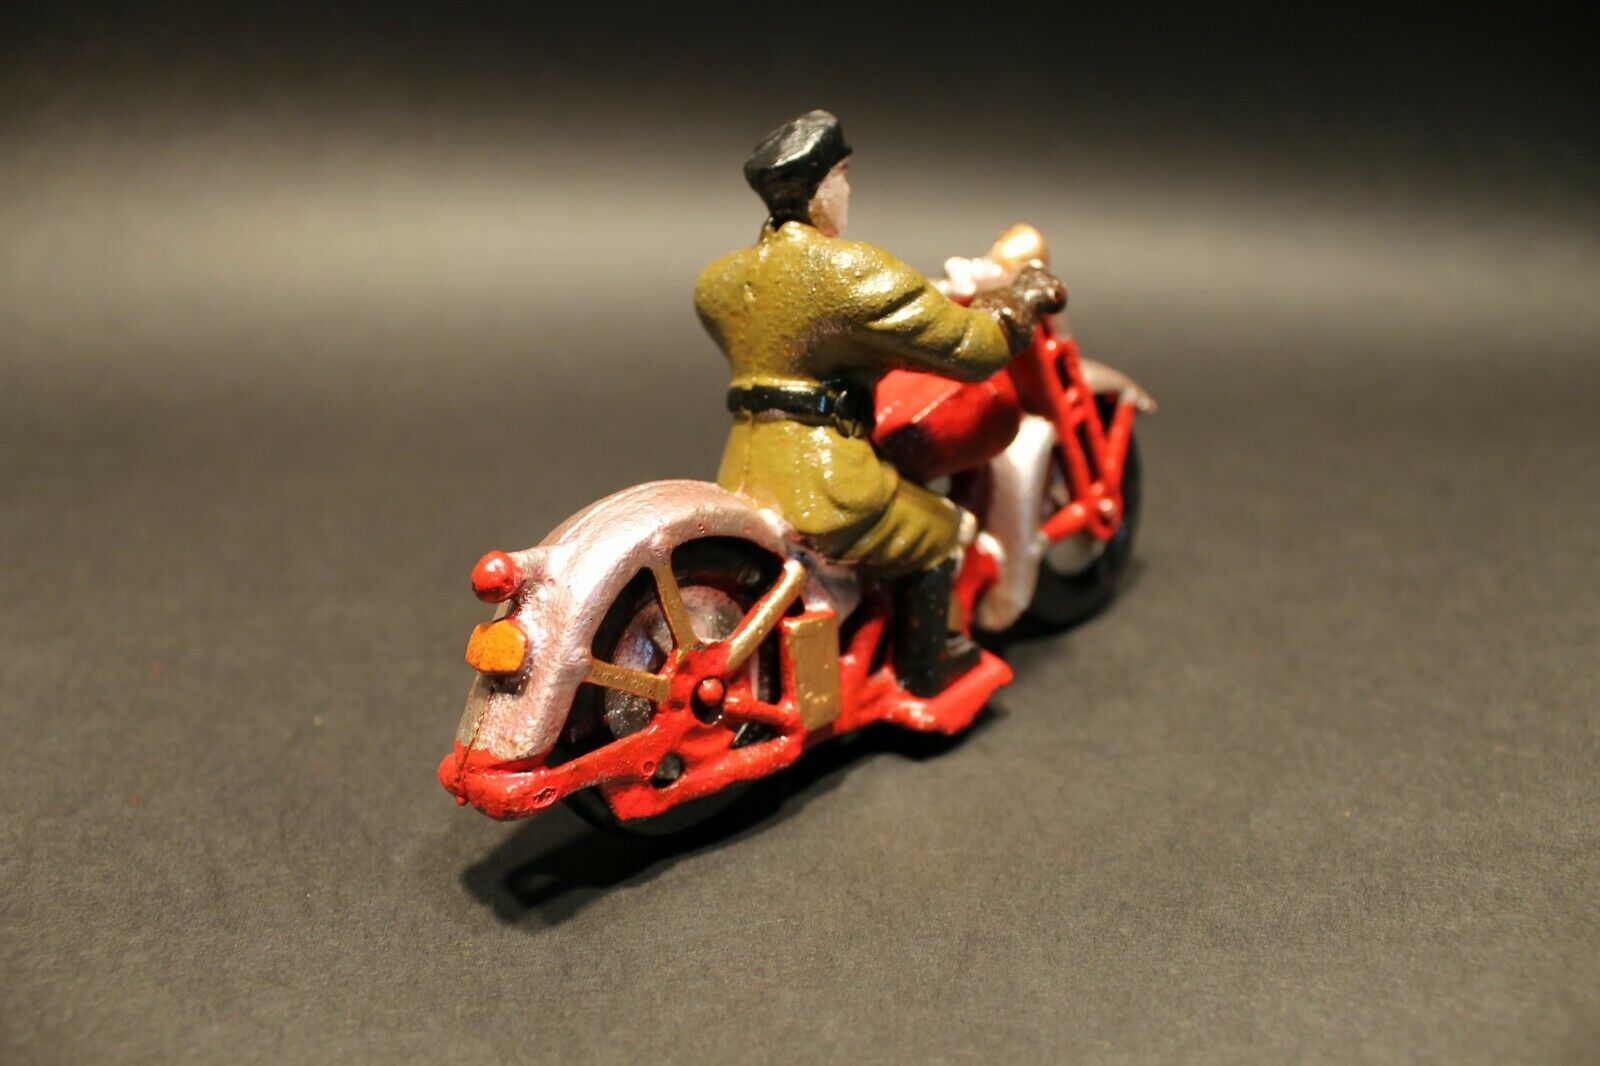 Antique Vintage Style Cast Iron Toy Motorcycle 1 Patrol Rider - Early Home Decor